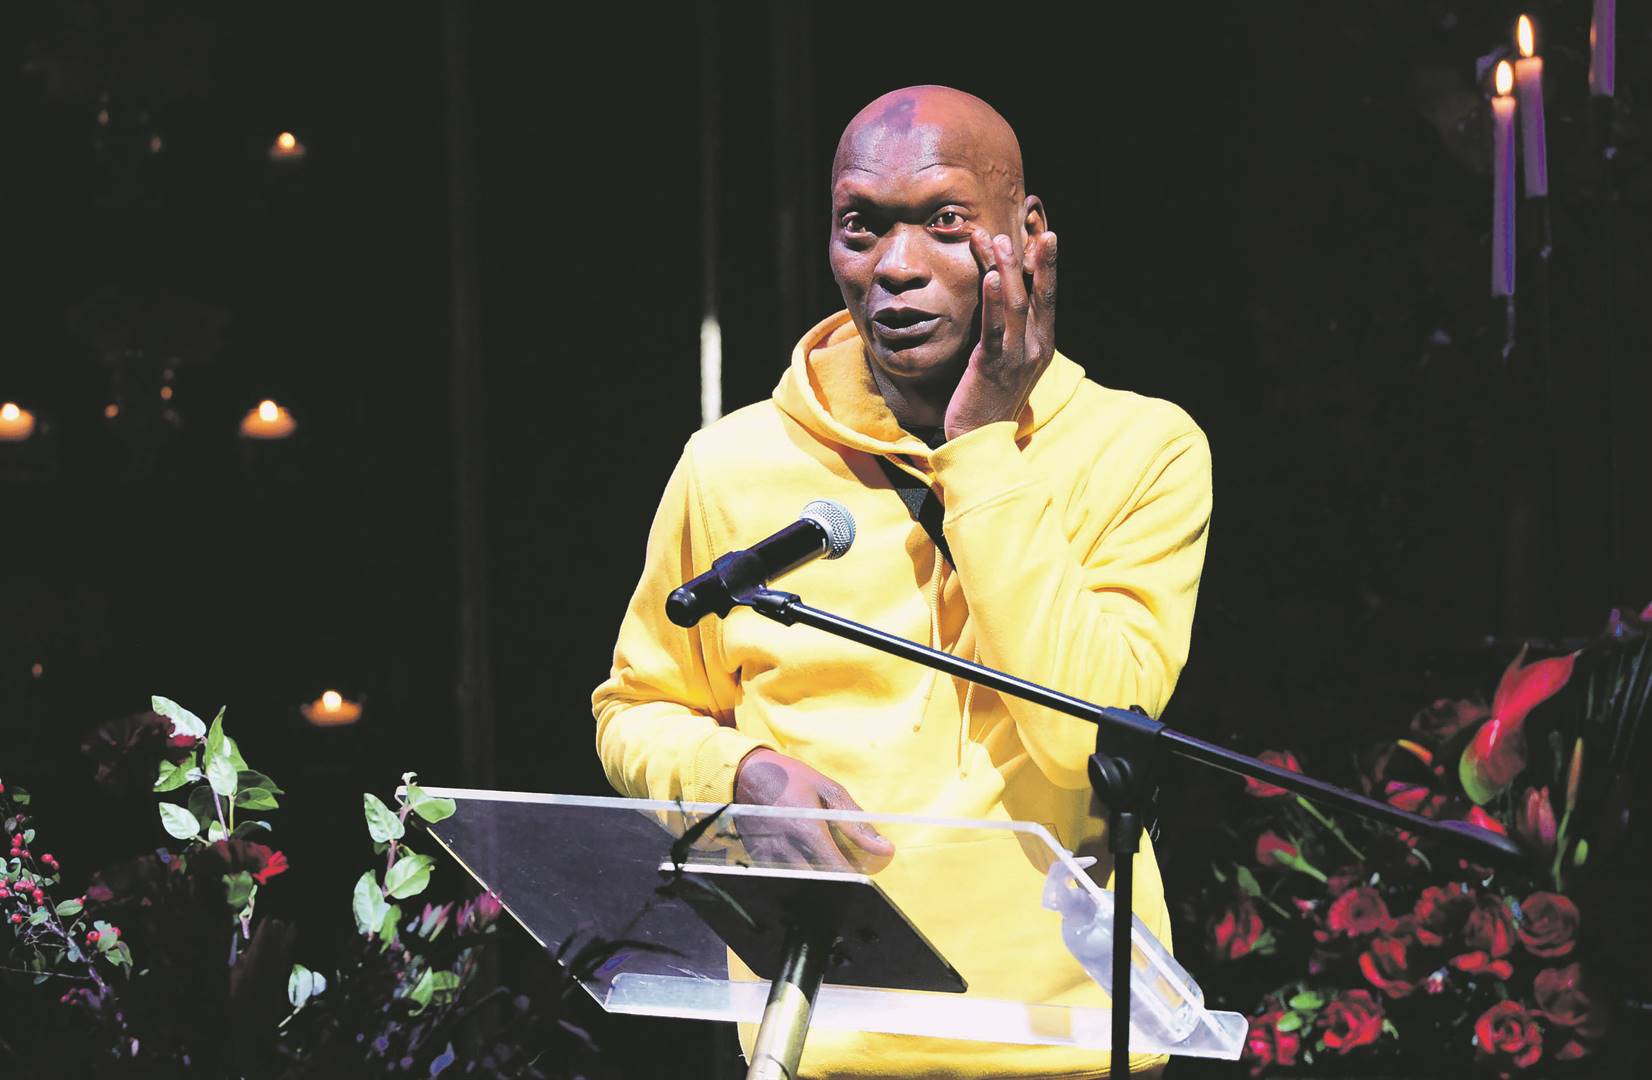 Warren Masemola and Thuli Thabethe speak fondly about their friendships with Busi Lurayi (inset) during her memorial service at the Market Theatre in Joburg.     Photos by                  Morapedi Mashashe